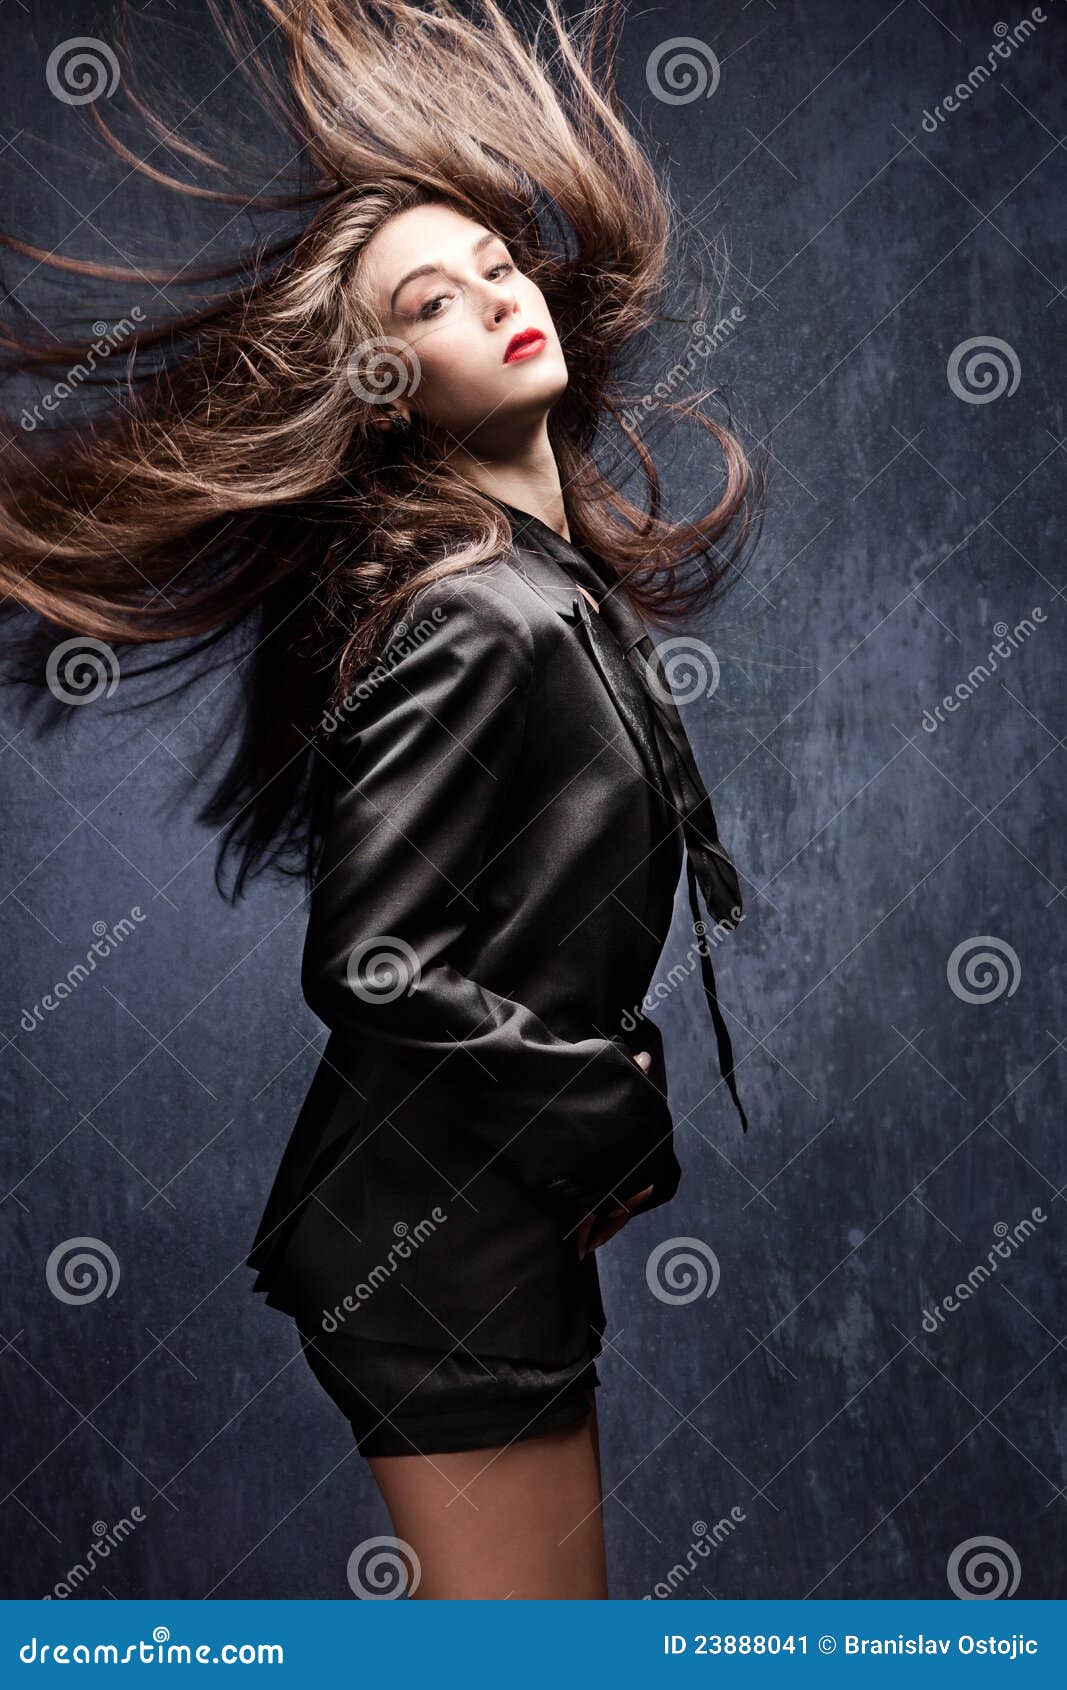 Hair Fly Stock Image - Image: 23888041